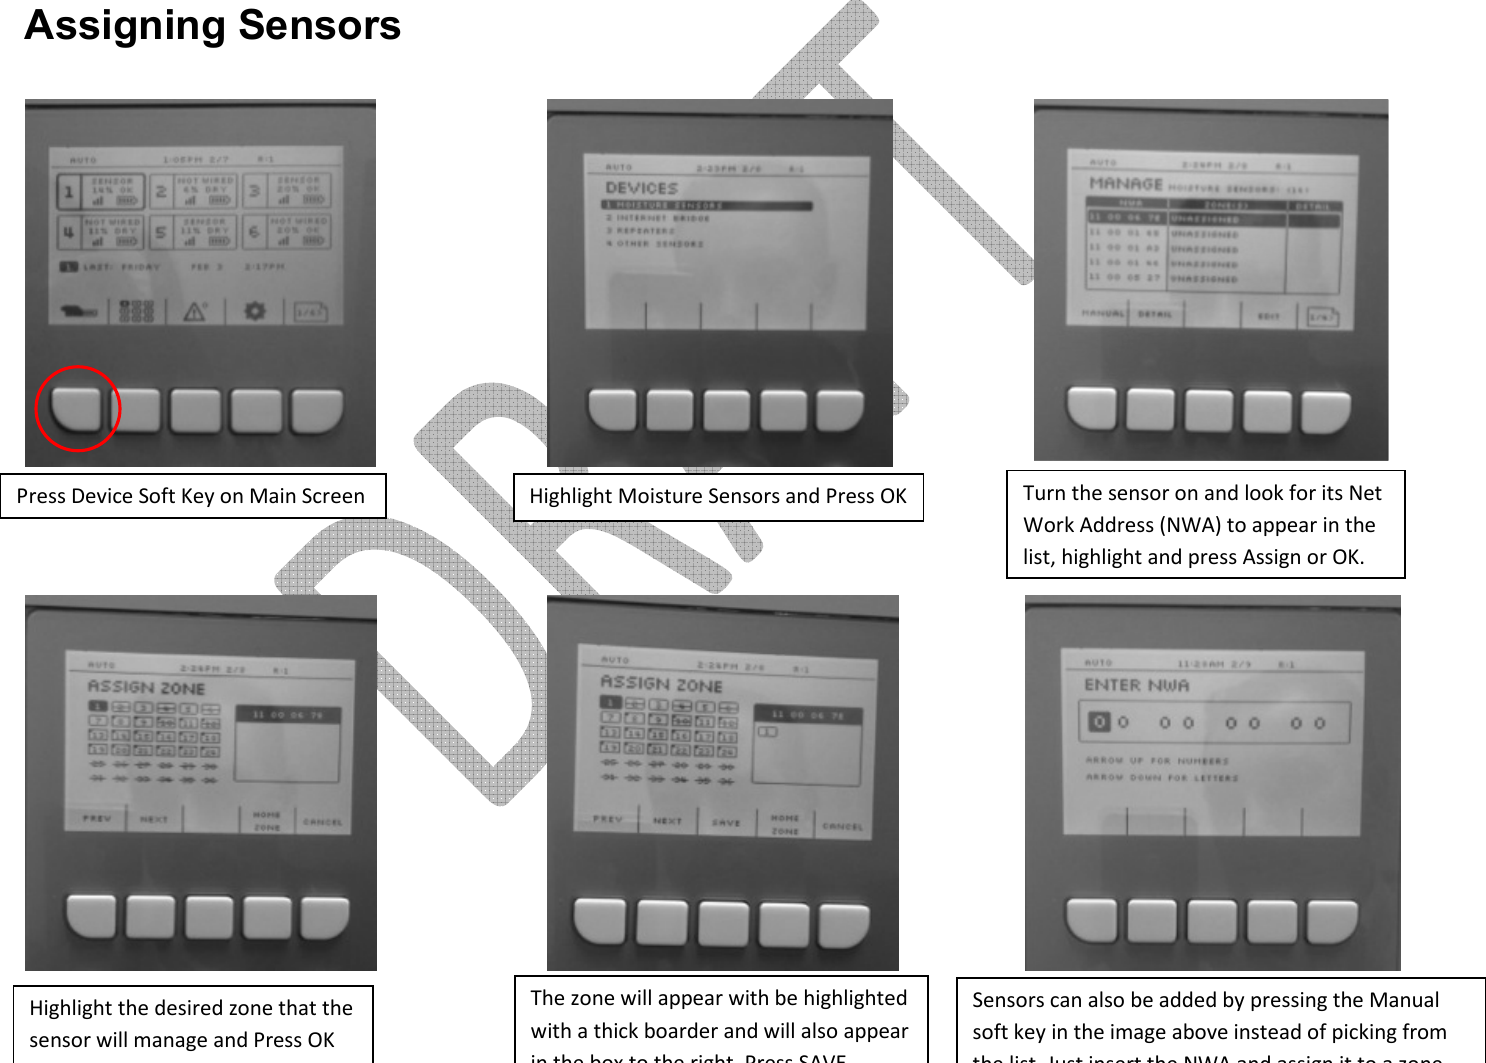       Assigning Sensors               Press Device Soft Key on Main Screen Highlight Moisture Sensors and Press OK Turn the sensor on and look for its Net Work Address (NWA) to appear in the list, highlight and press Assign or OK. Highlight the desired zone that the sensor will manage and Press OK (multiple zones can be chosen) The zone will appear with be highlighted with a thick boarder and will also appear in the box to the right, Press SAVE Sensors can also be added by pressing the Manual soft key in the image above instead of picking from the list. Just insert the NWA and assign it to a zone 